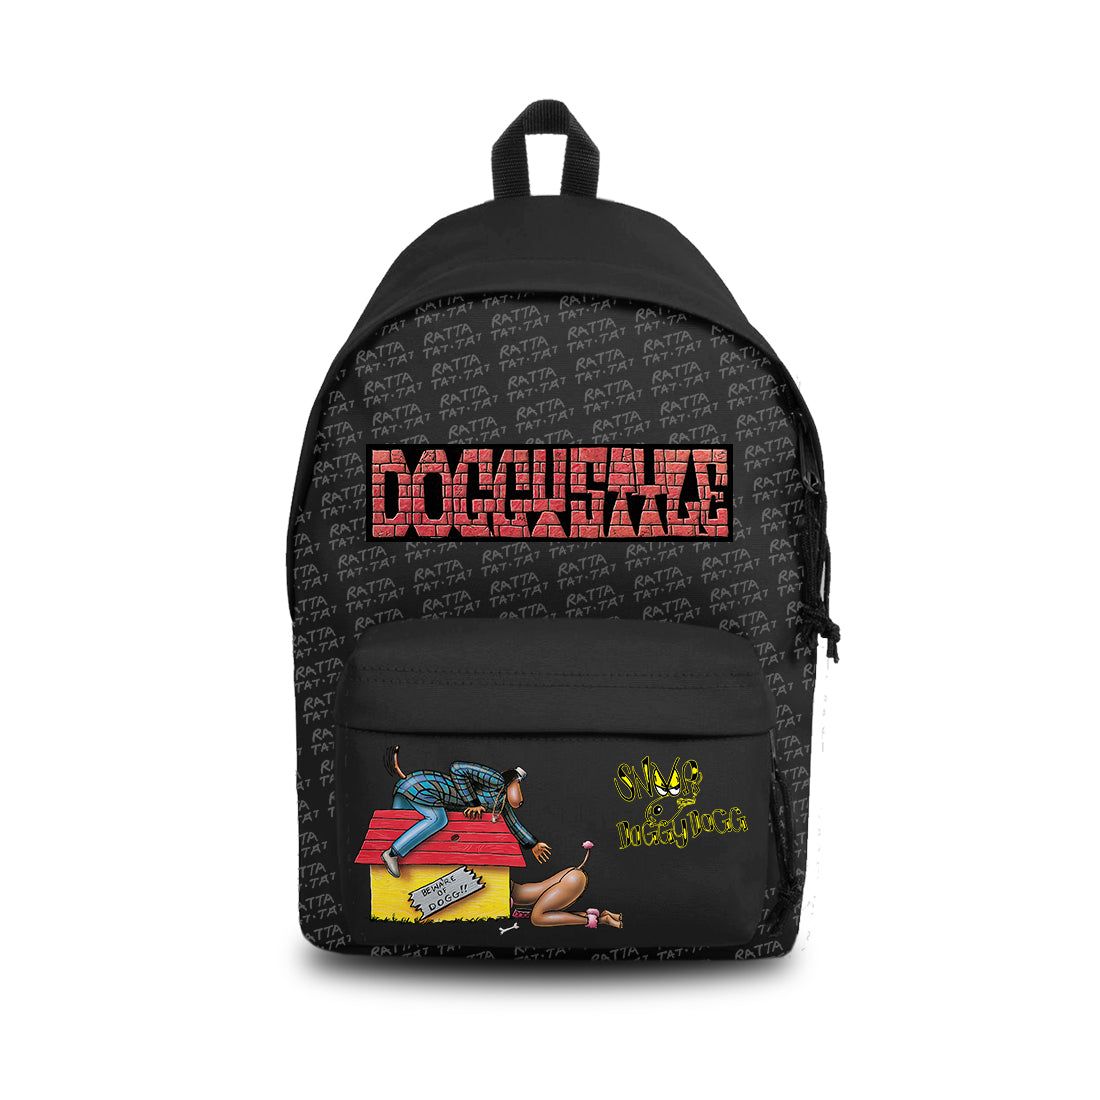 Wholesale Rocksax Death Row Records Doggystyle Daypack